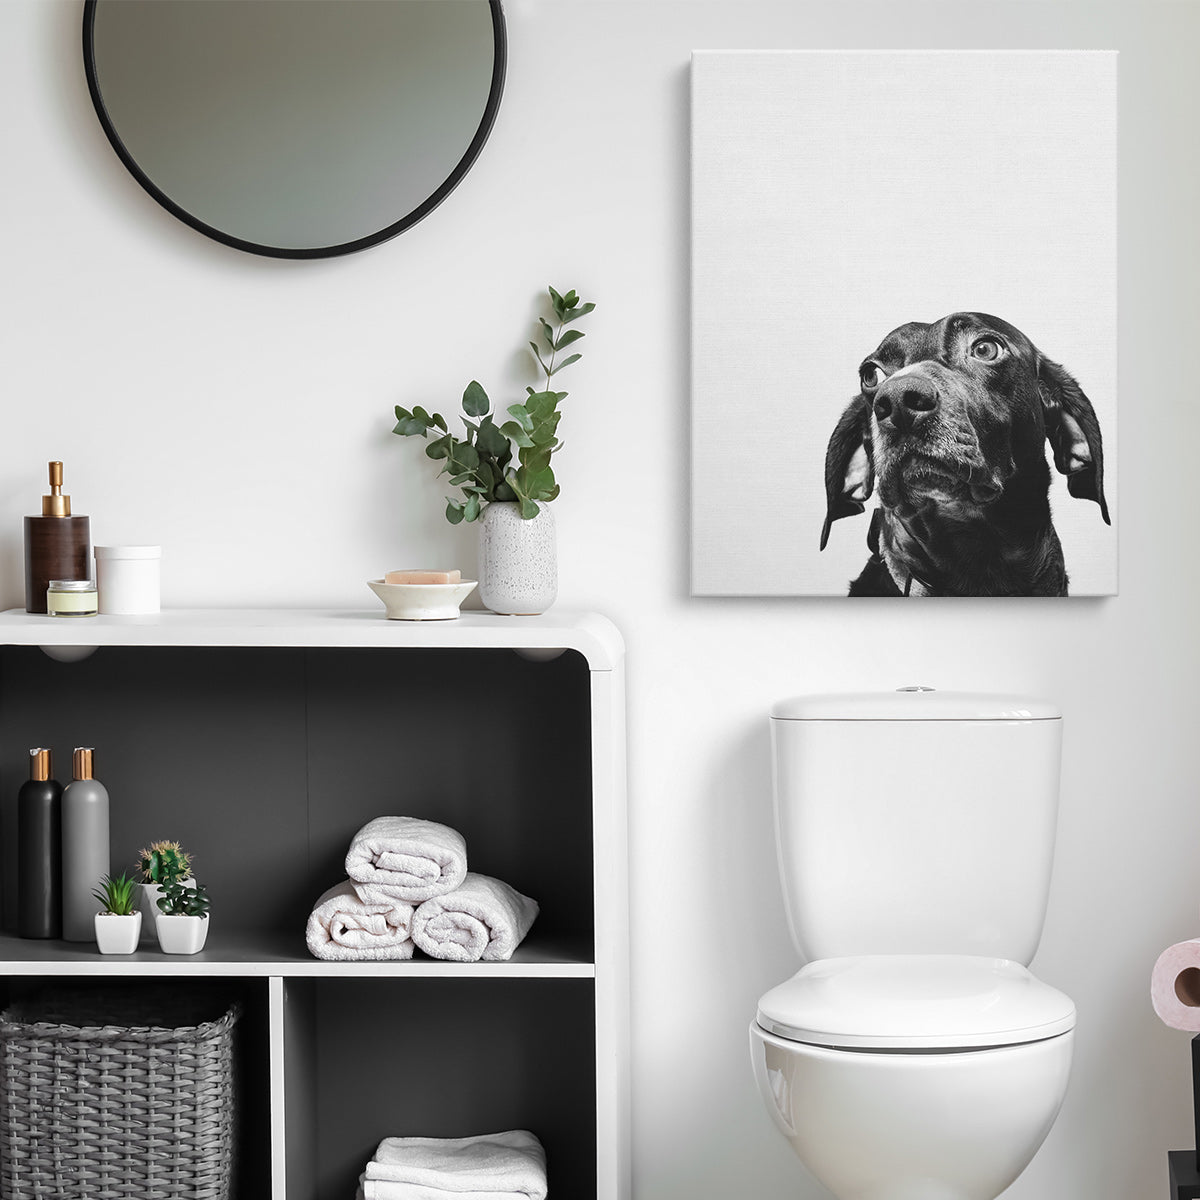 Photo of Dog Printed on Canvas and Hanging in Bathroom Above Toilet